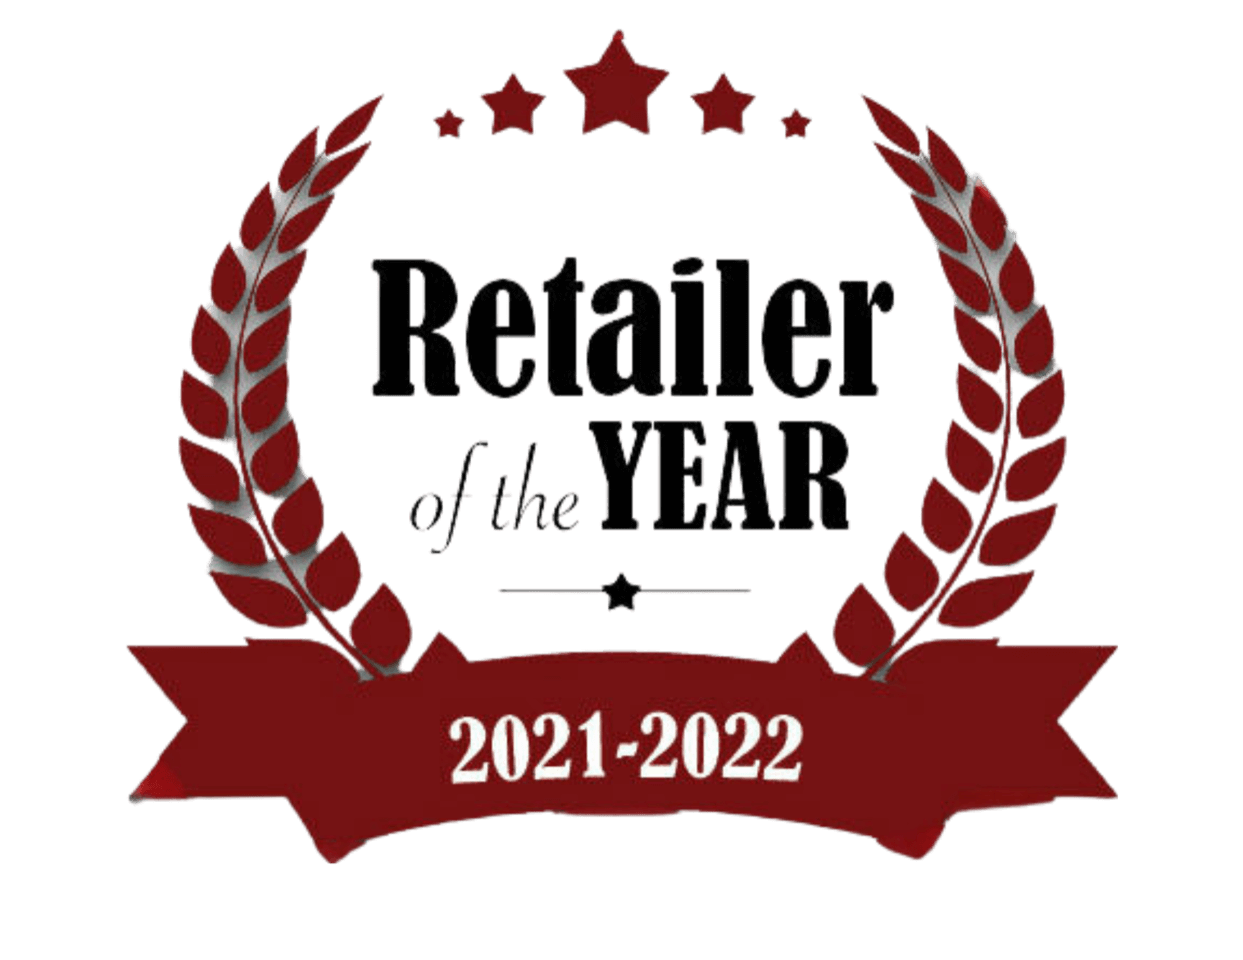 2021-2022 Customer Service and Education Retailer of the Year